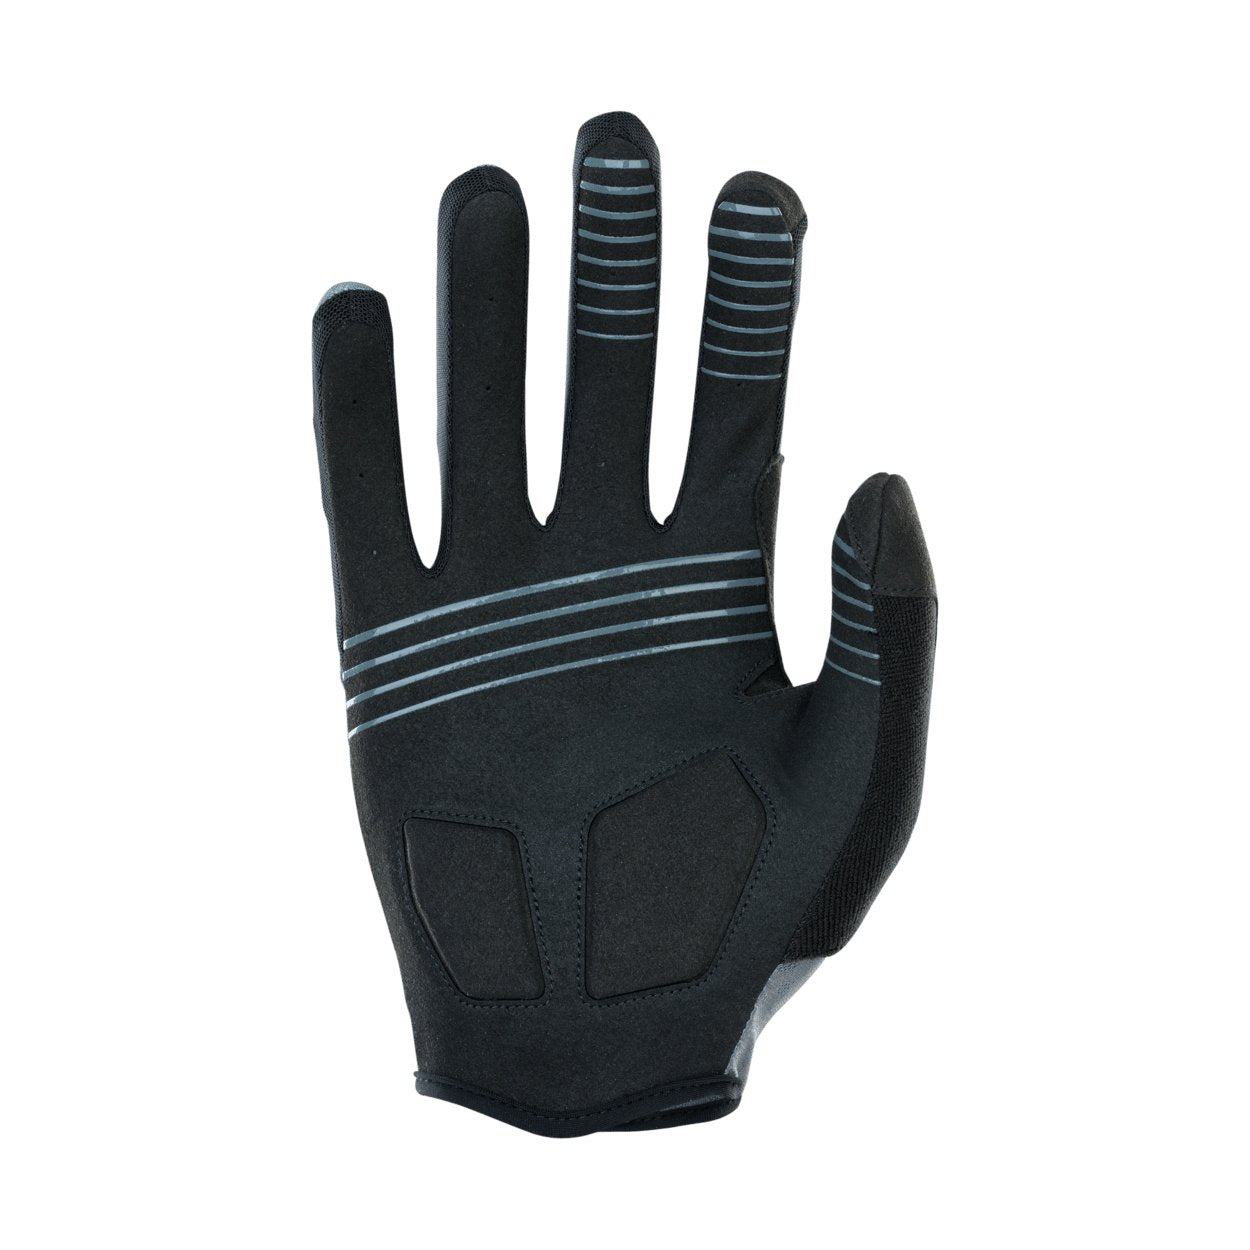 ION MTB Gloves Traze Long 2022 - Worthing Watersports - 9010583028002 - Gloves - ION Bike